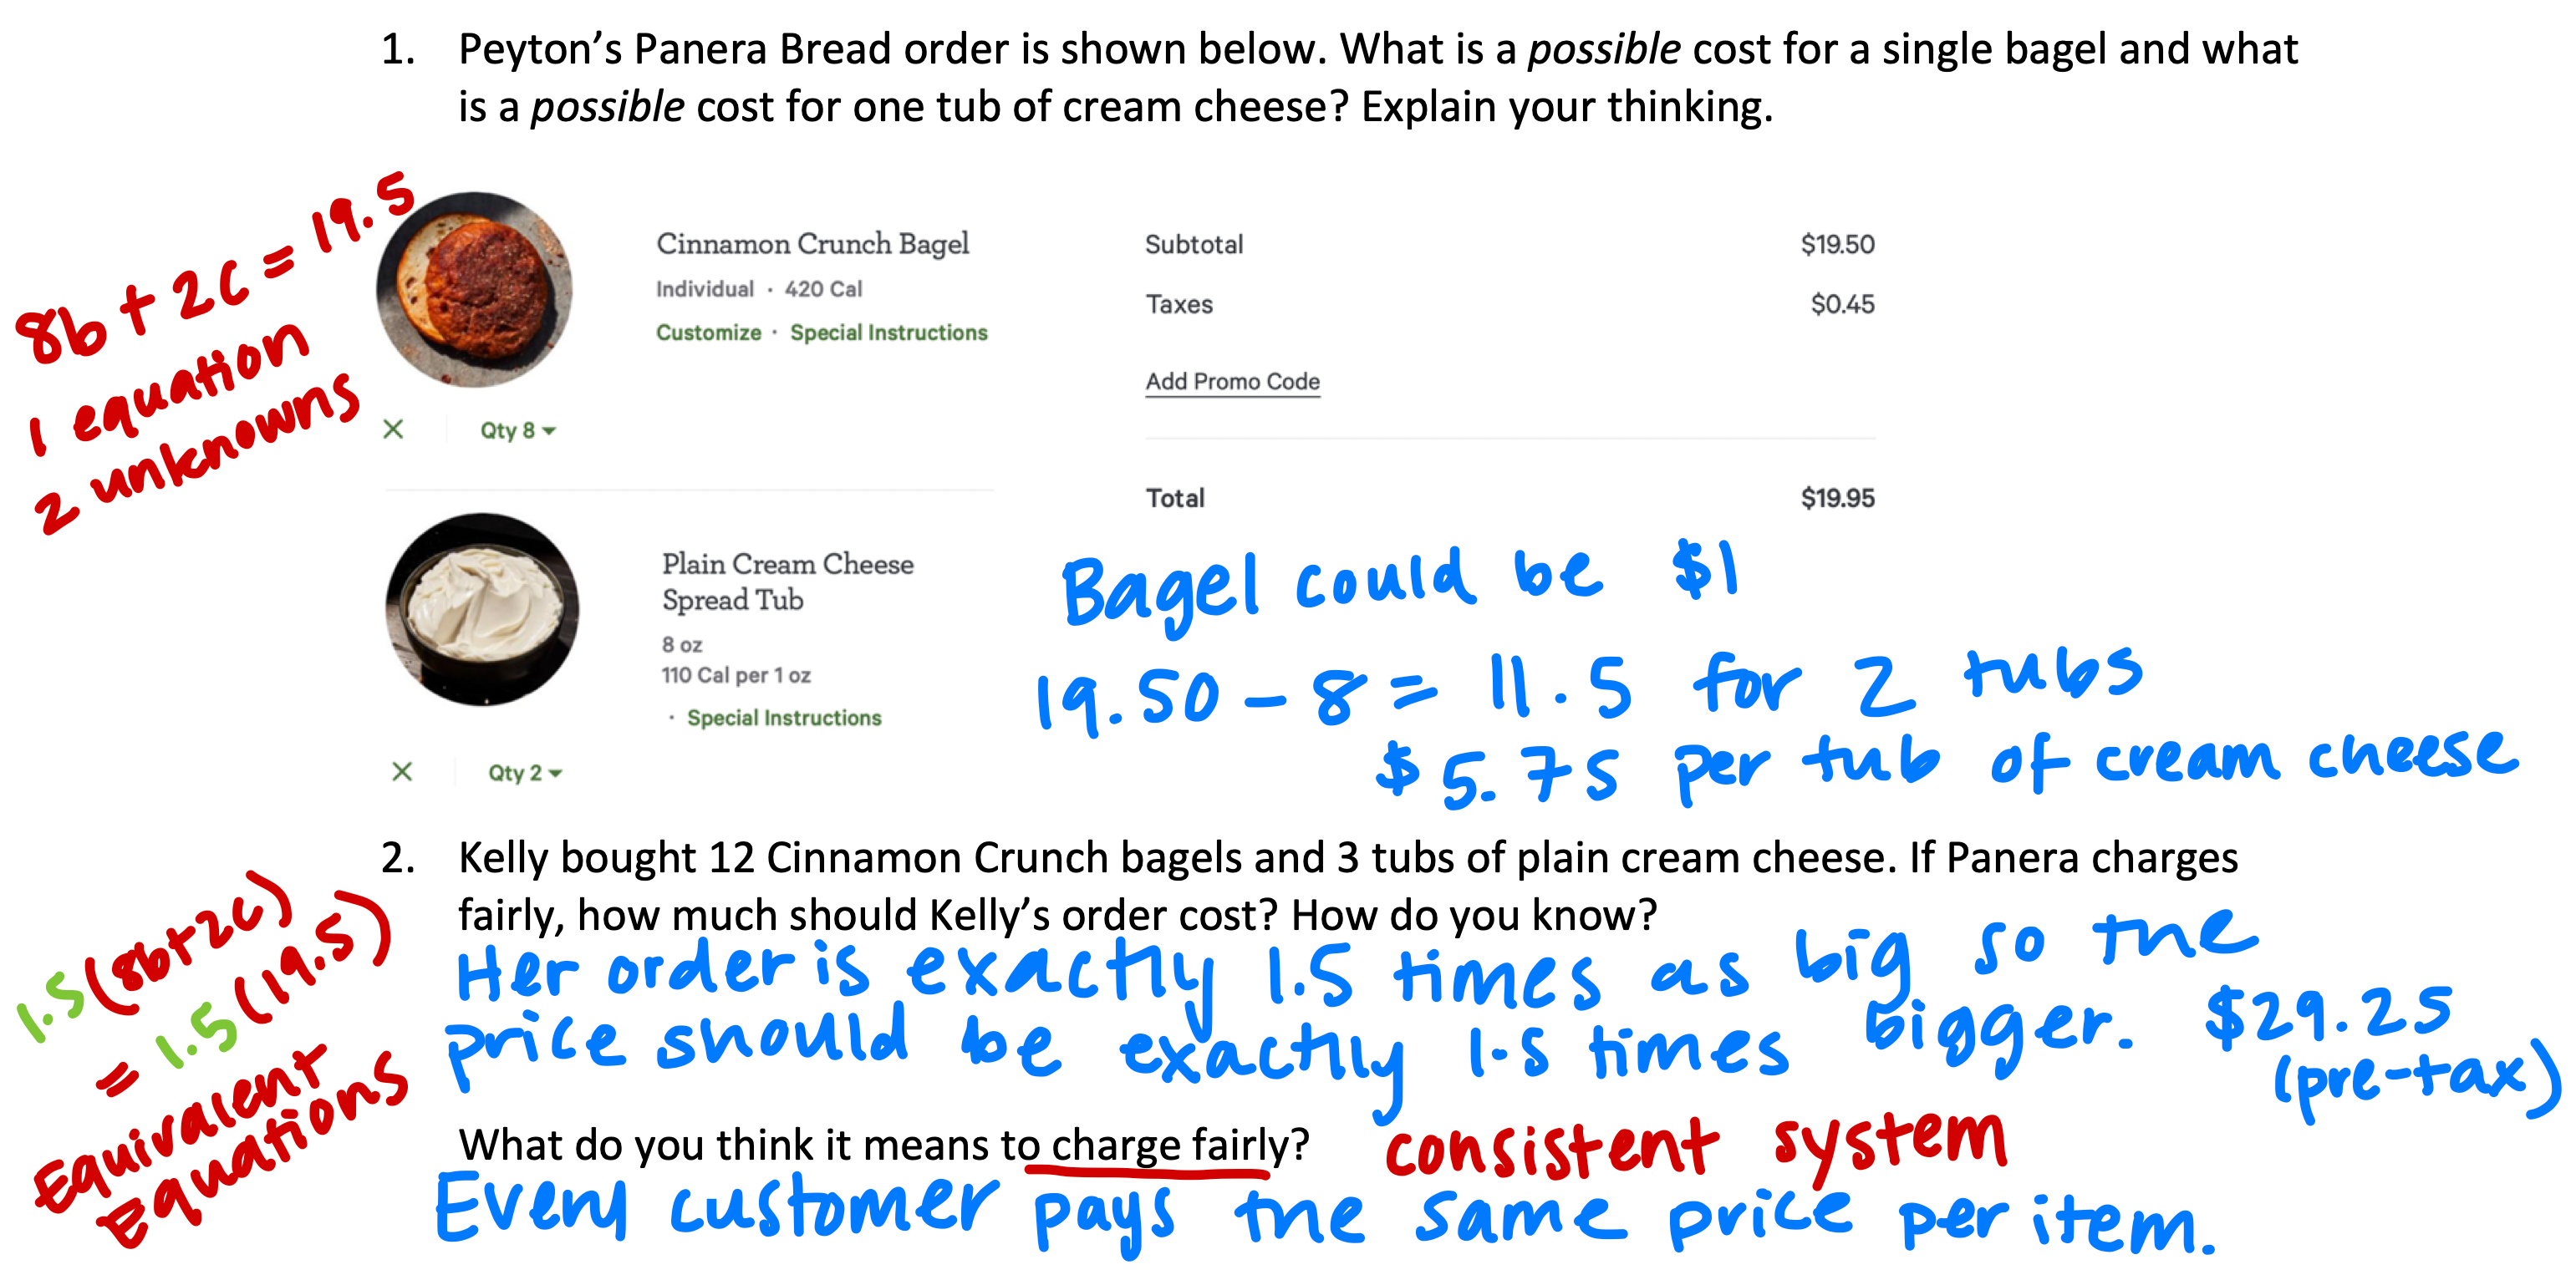 Does Panera Charge Fairly?.png